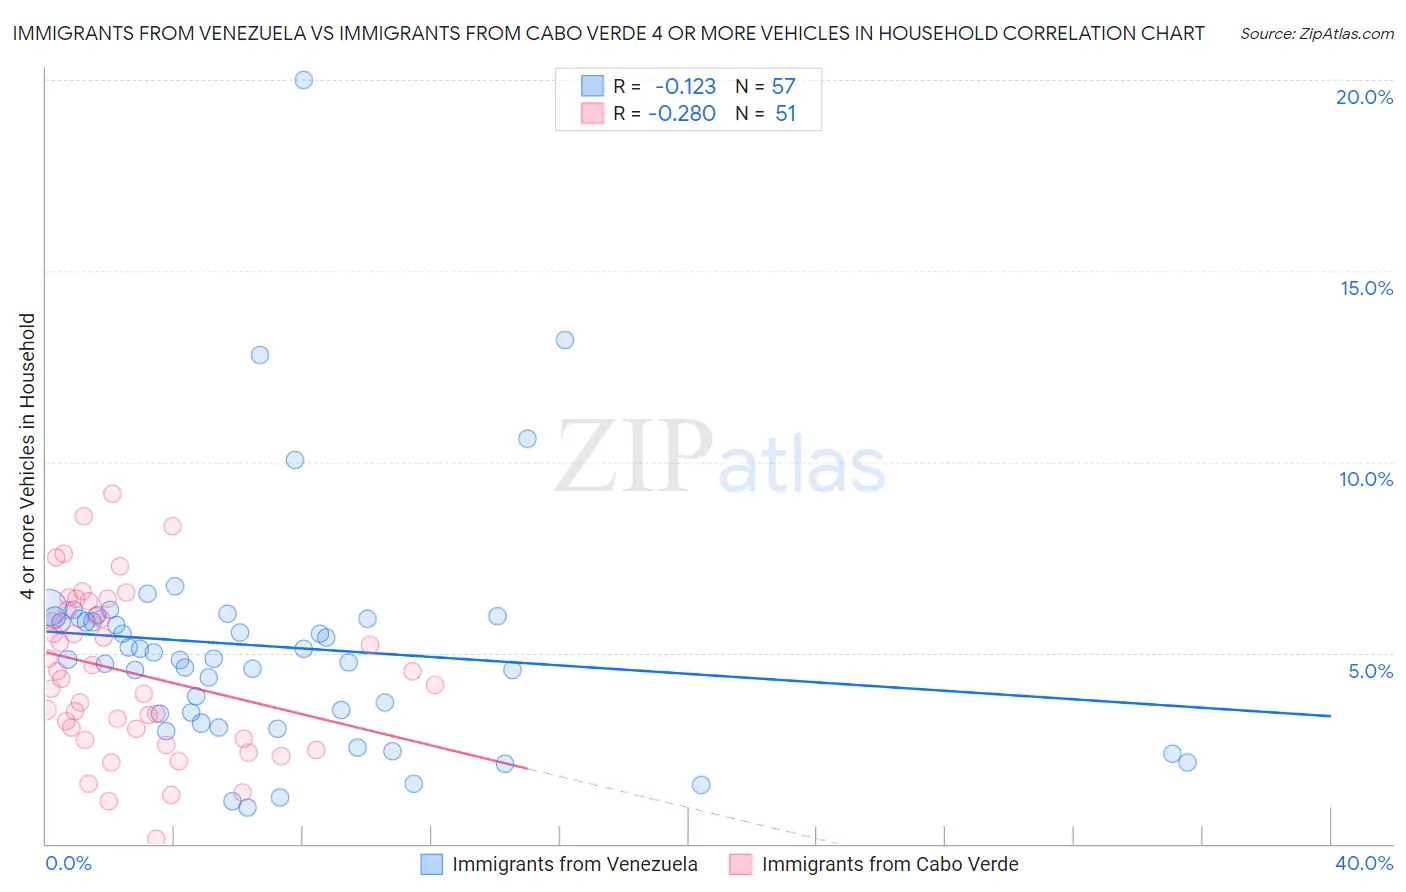 Immigrants from Venezuela vs Immigrants from Cabo Verde 4 or more Vehicles in Household